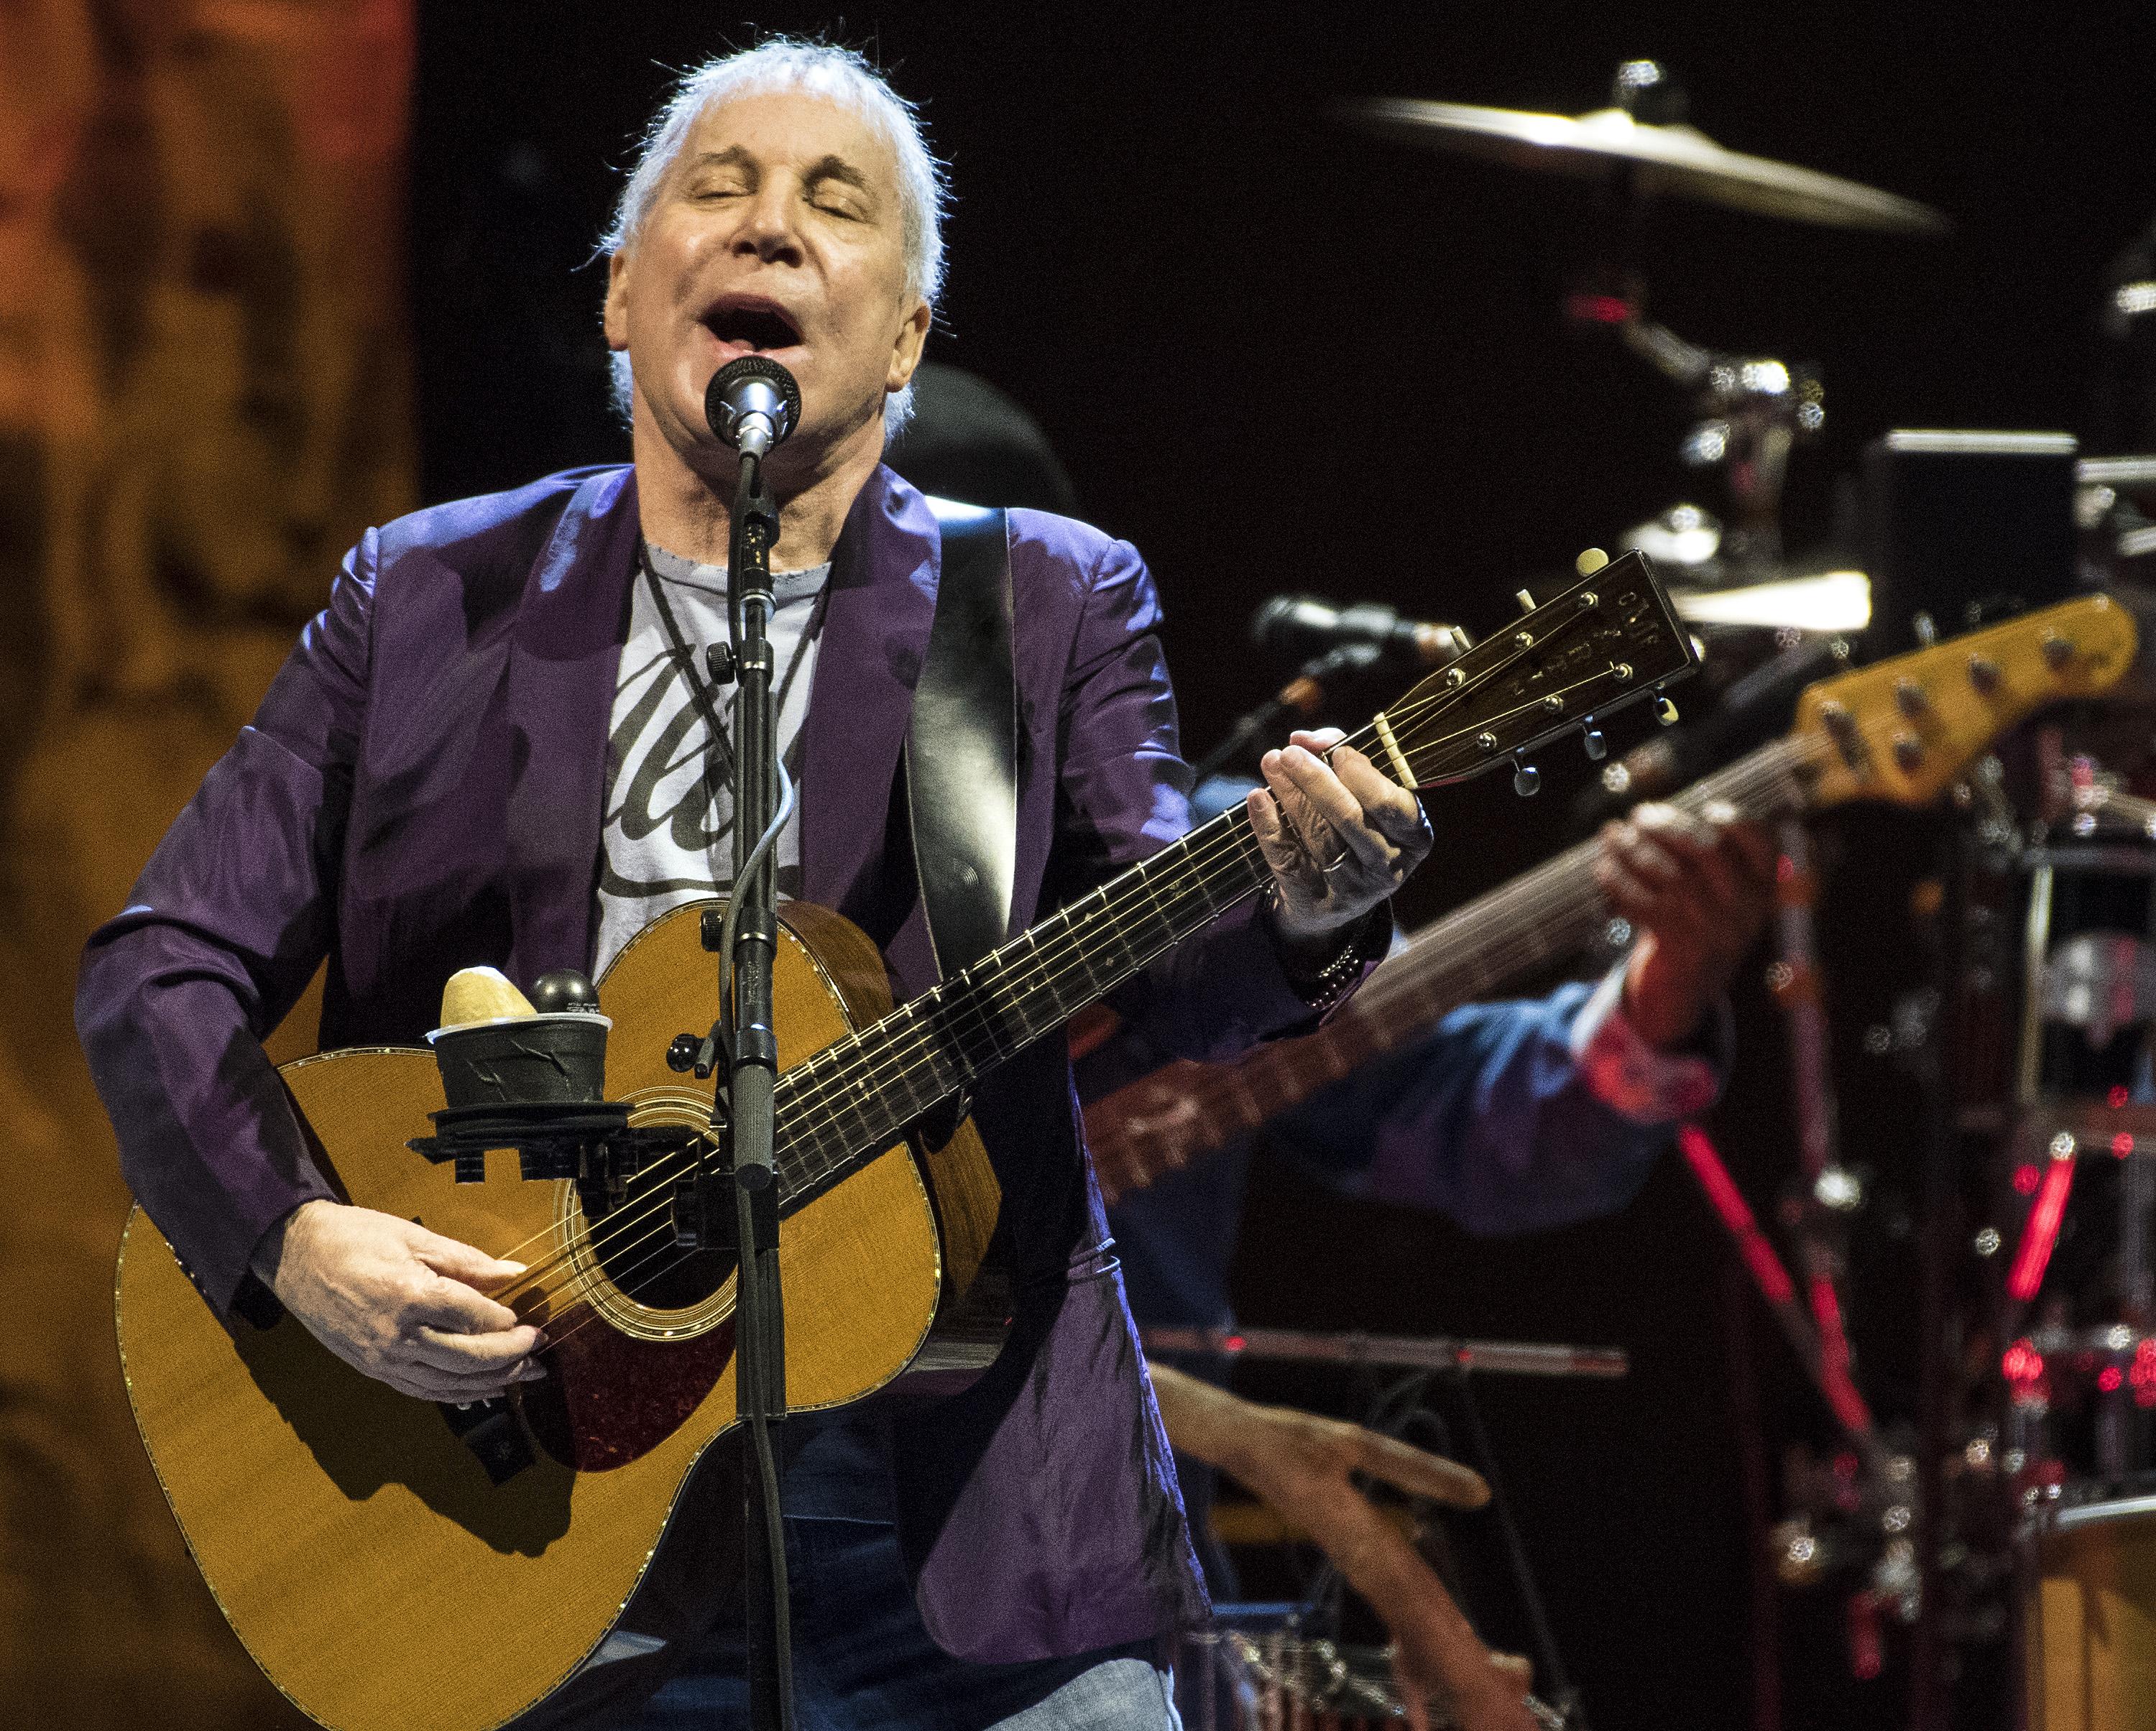 Paul Simon talks, performs at daughter’s college alma mater The